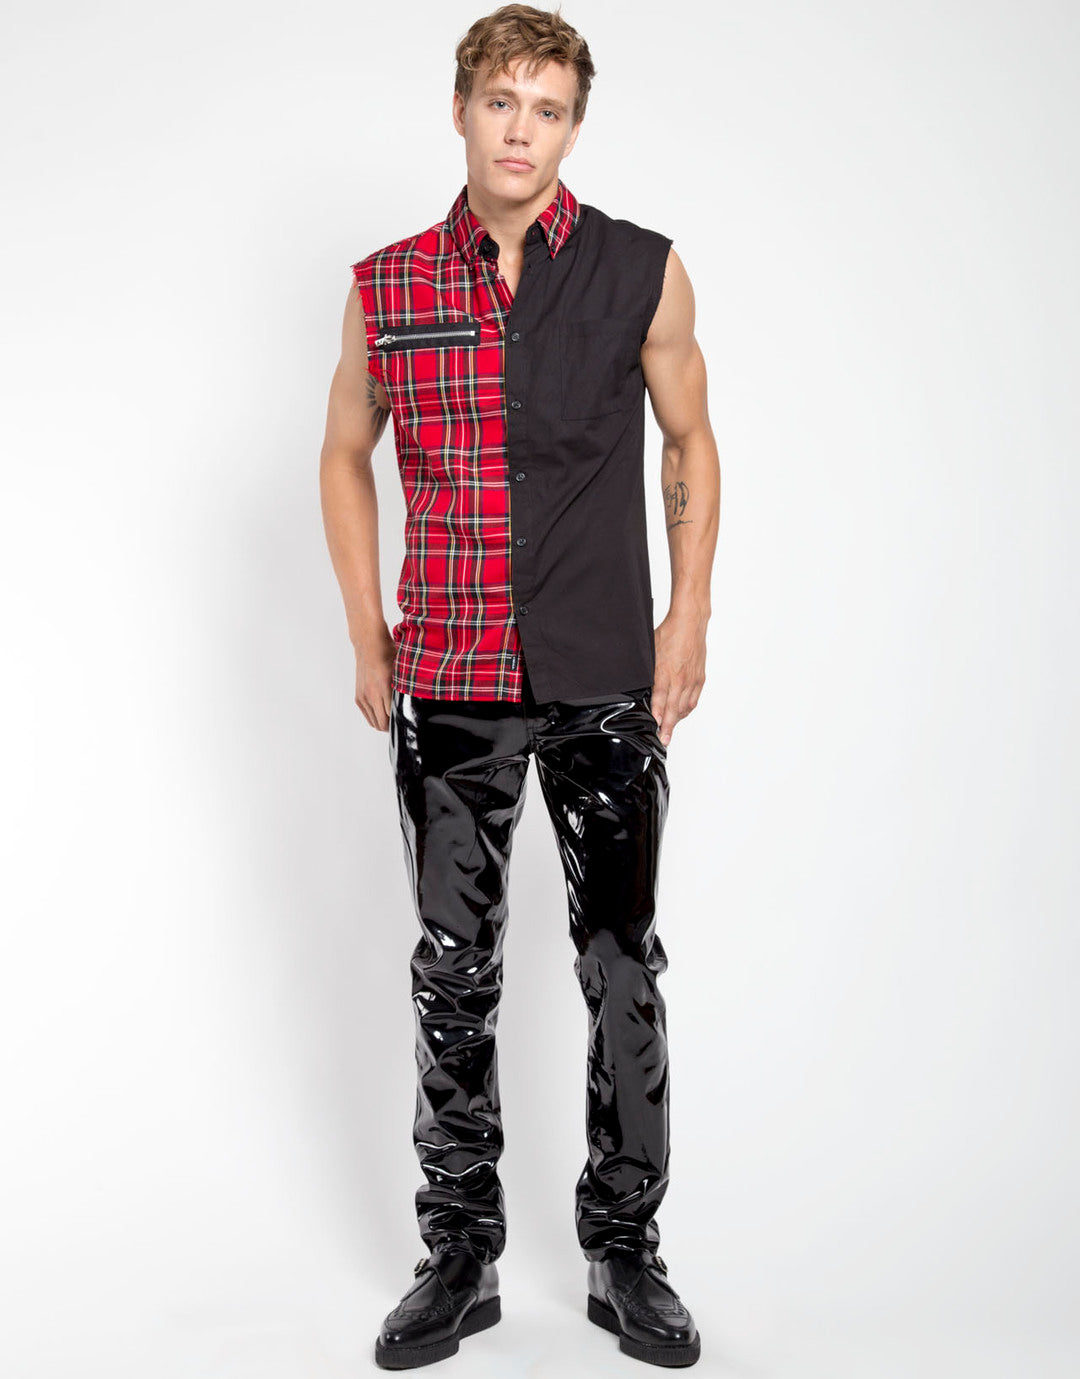 The The Classic Vinyl Pant on a model wearing a two tone plaid and black sleeveless shirt, front view.